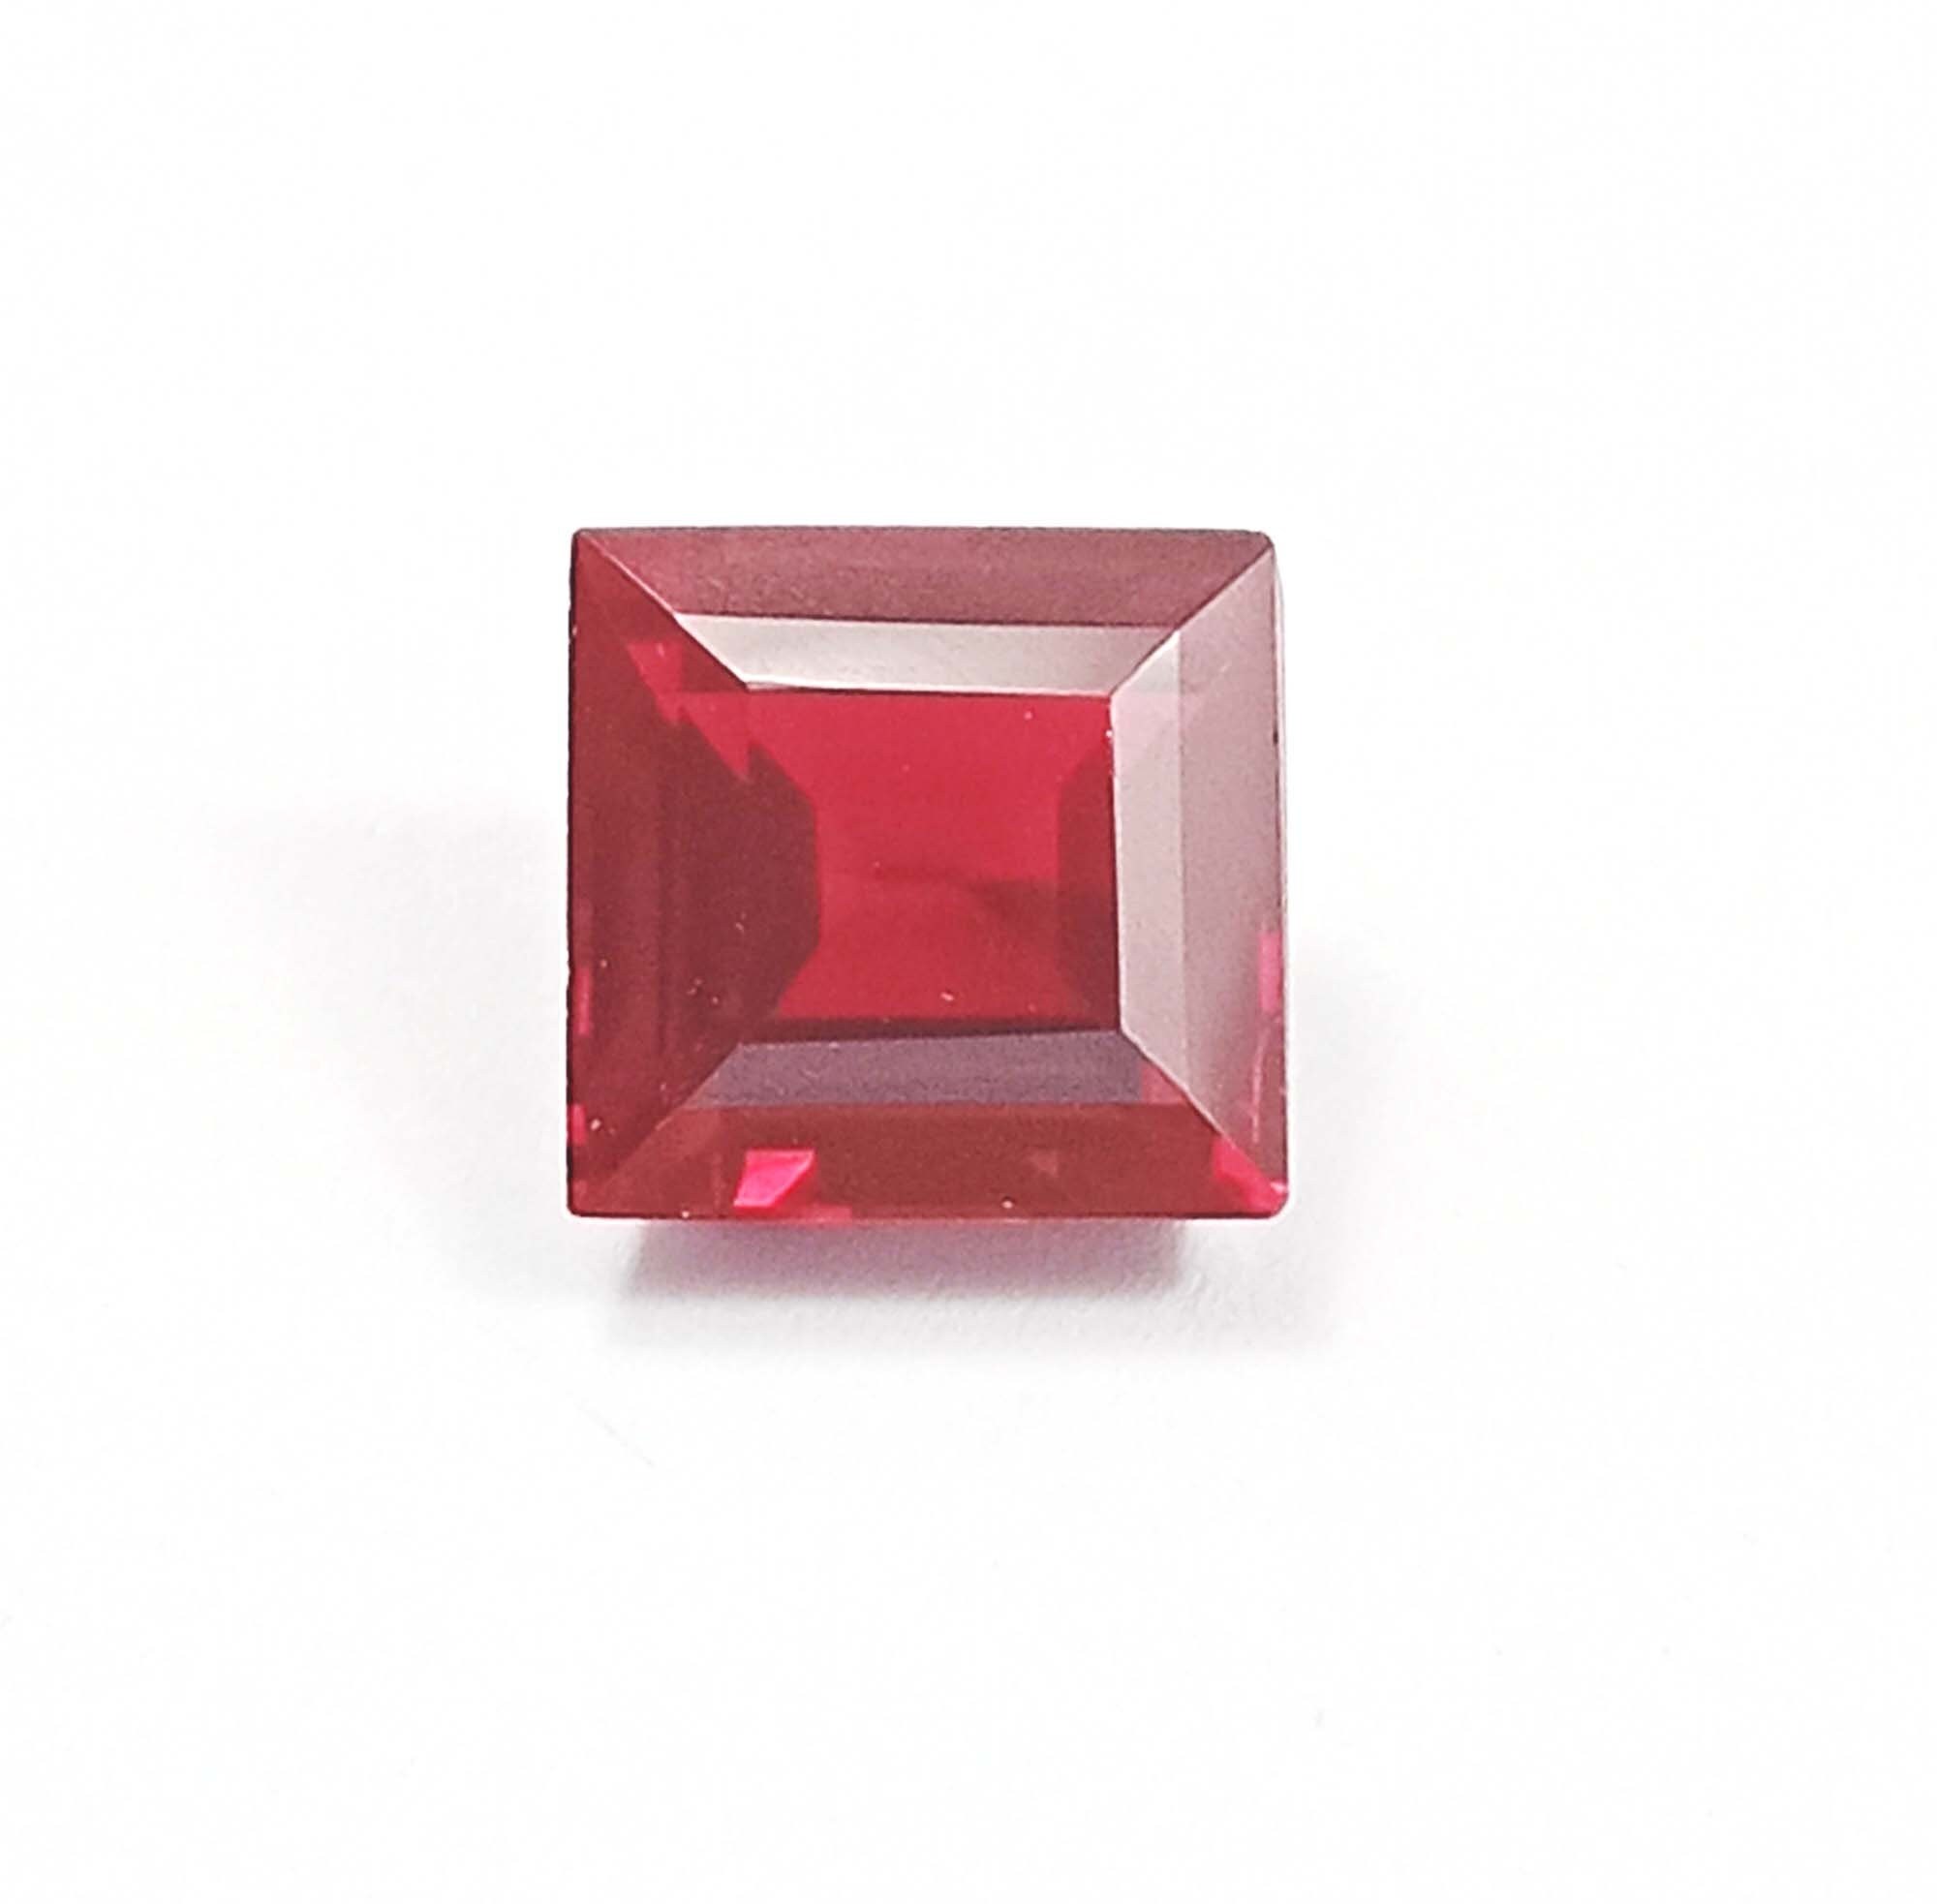 5.30 CT Red Ruby Natural  Loose Gemstone 19.57x9.62MM Ring Size Square Shape Eye Clean Ring Size From Mozambique With A Free Gift